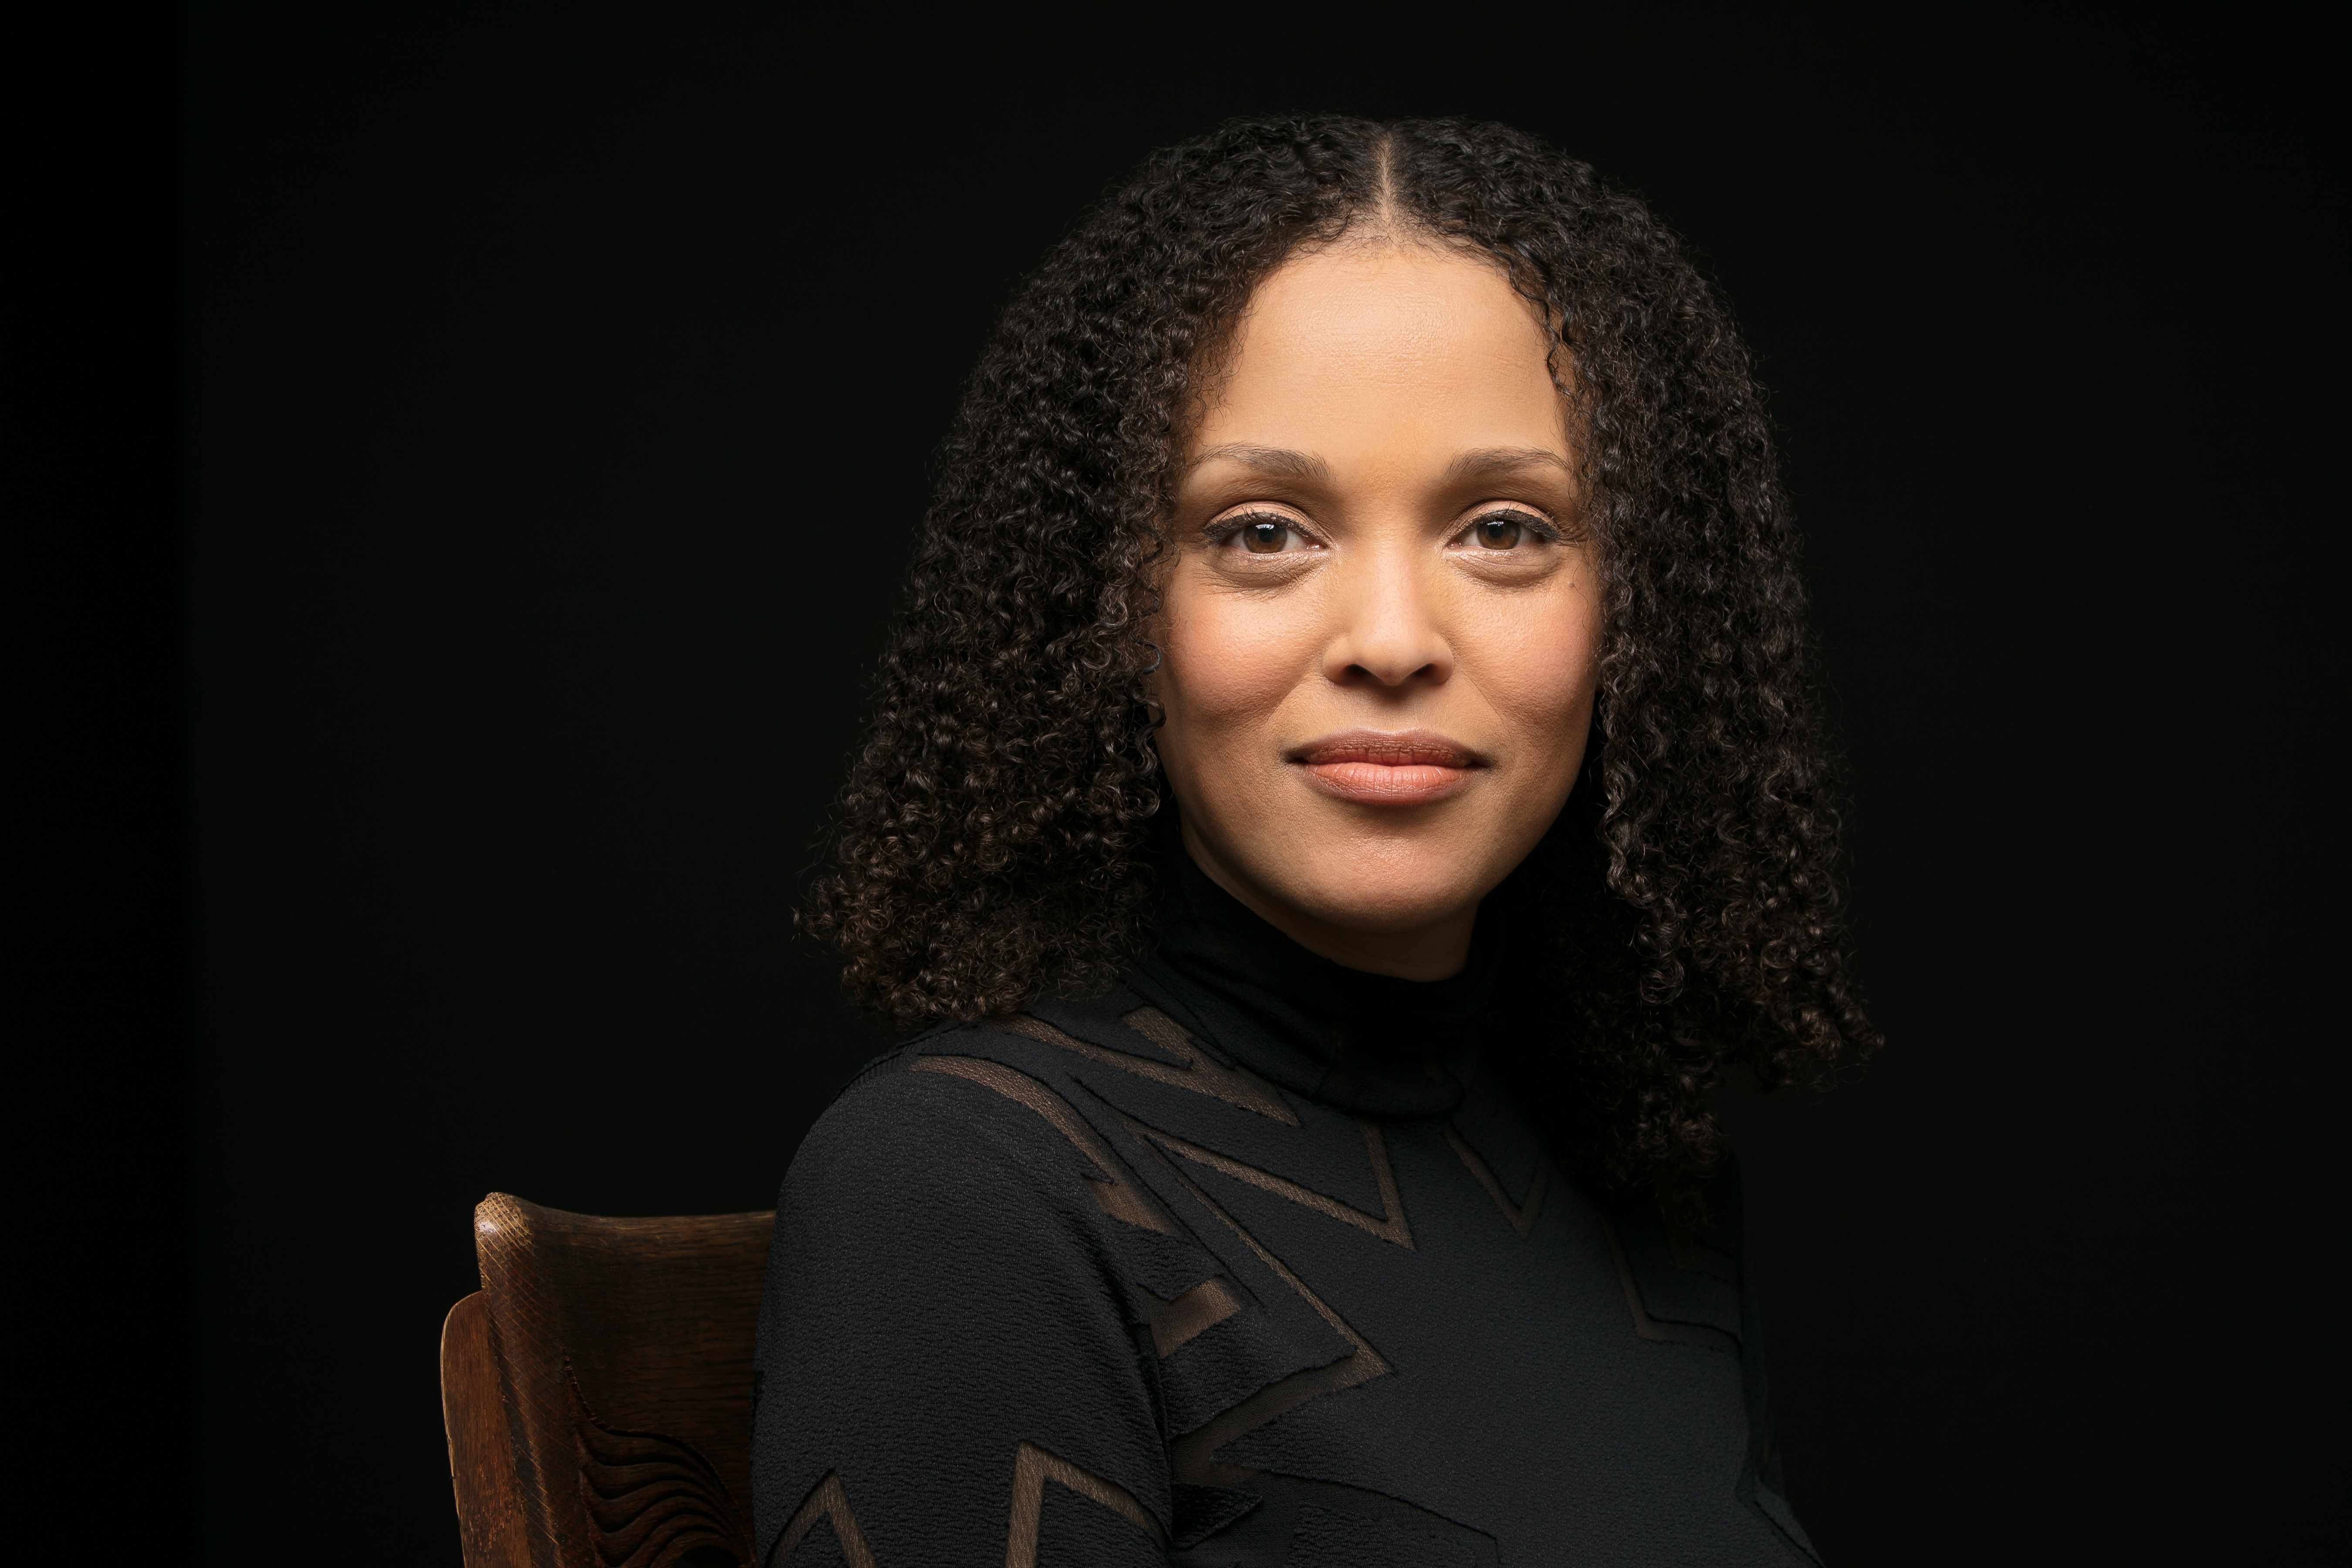 photo of author Jesmyn Ward wearing a black turtleneck looking directly at the camera